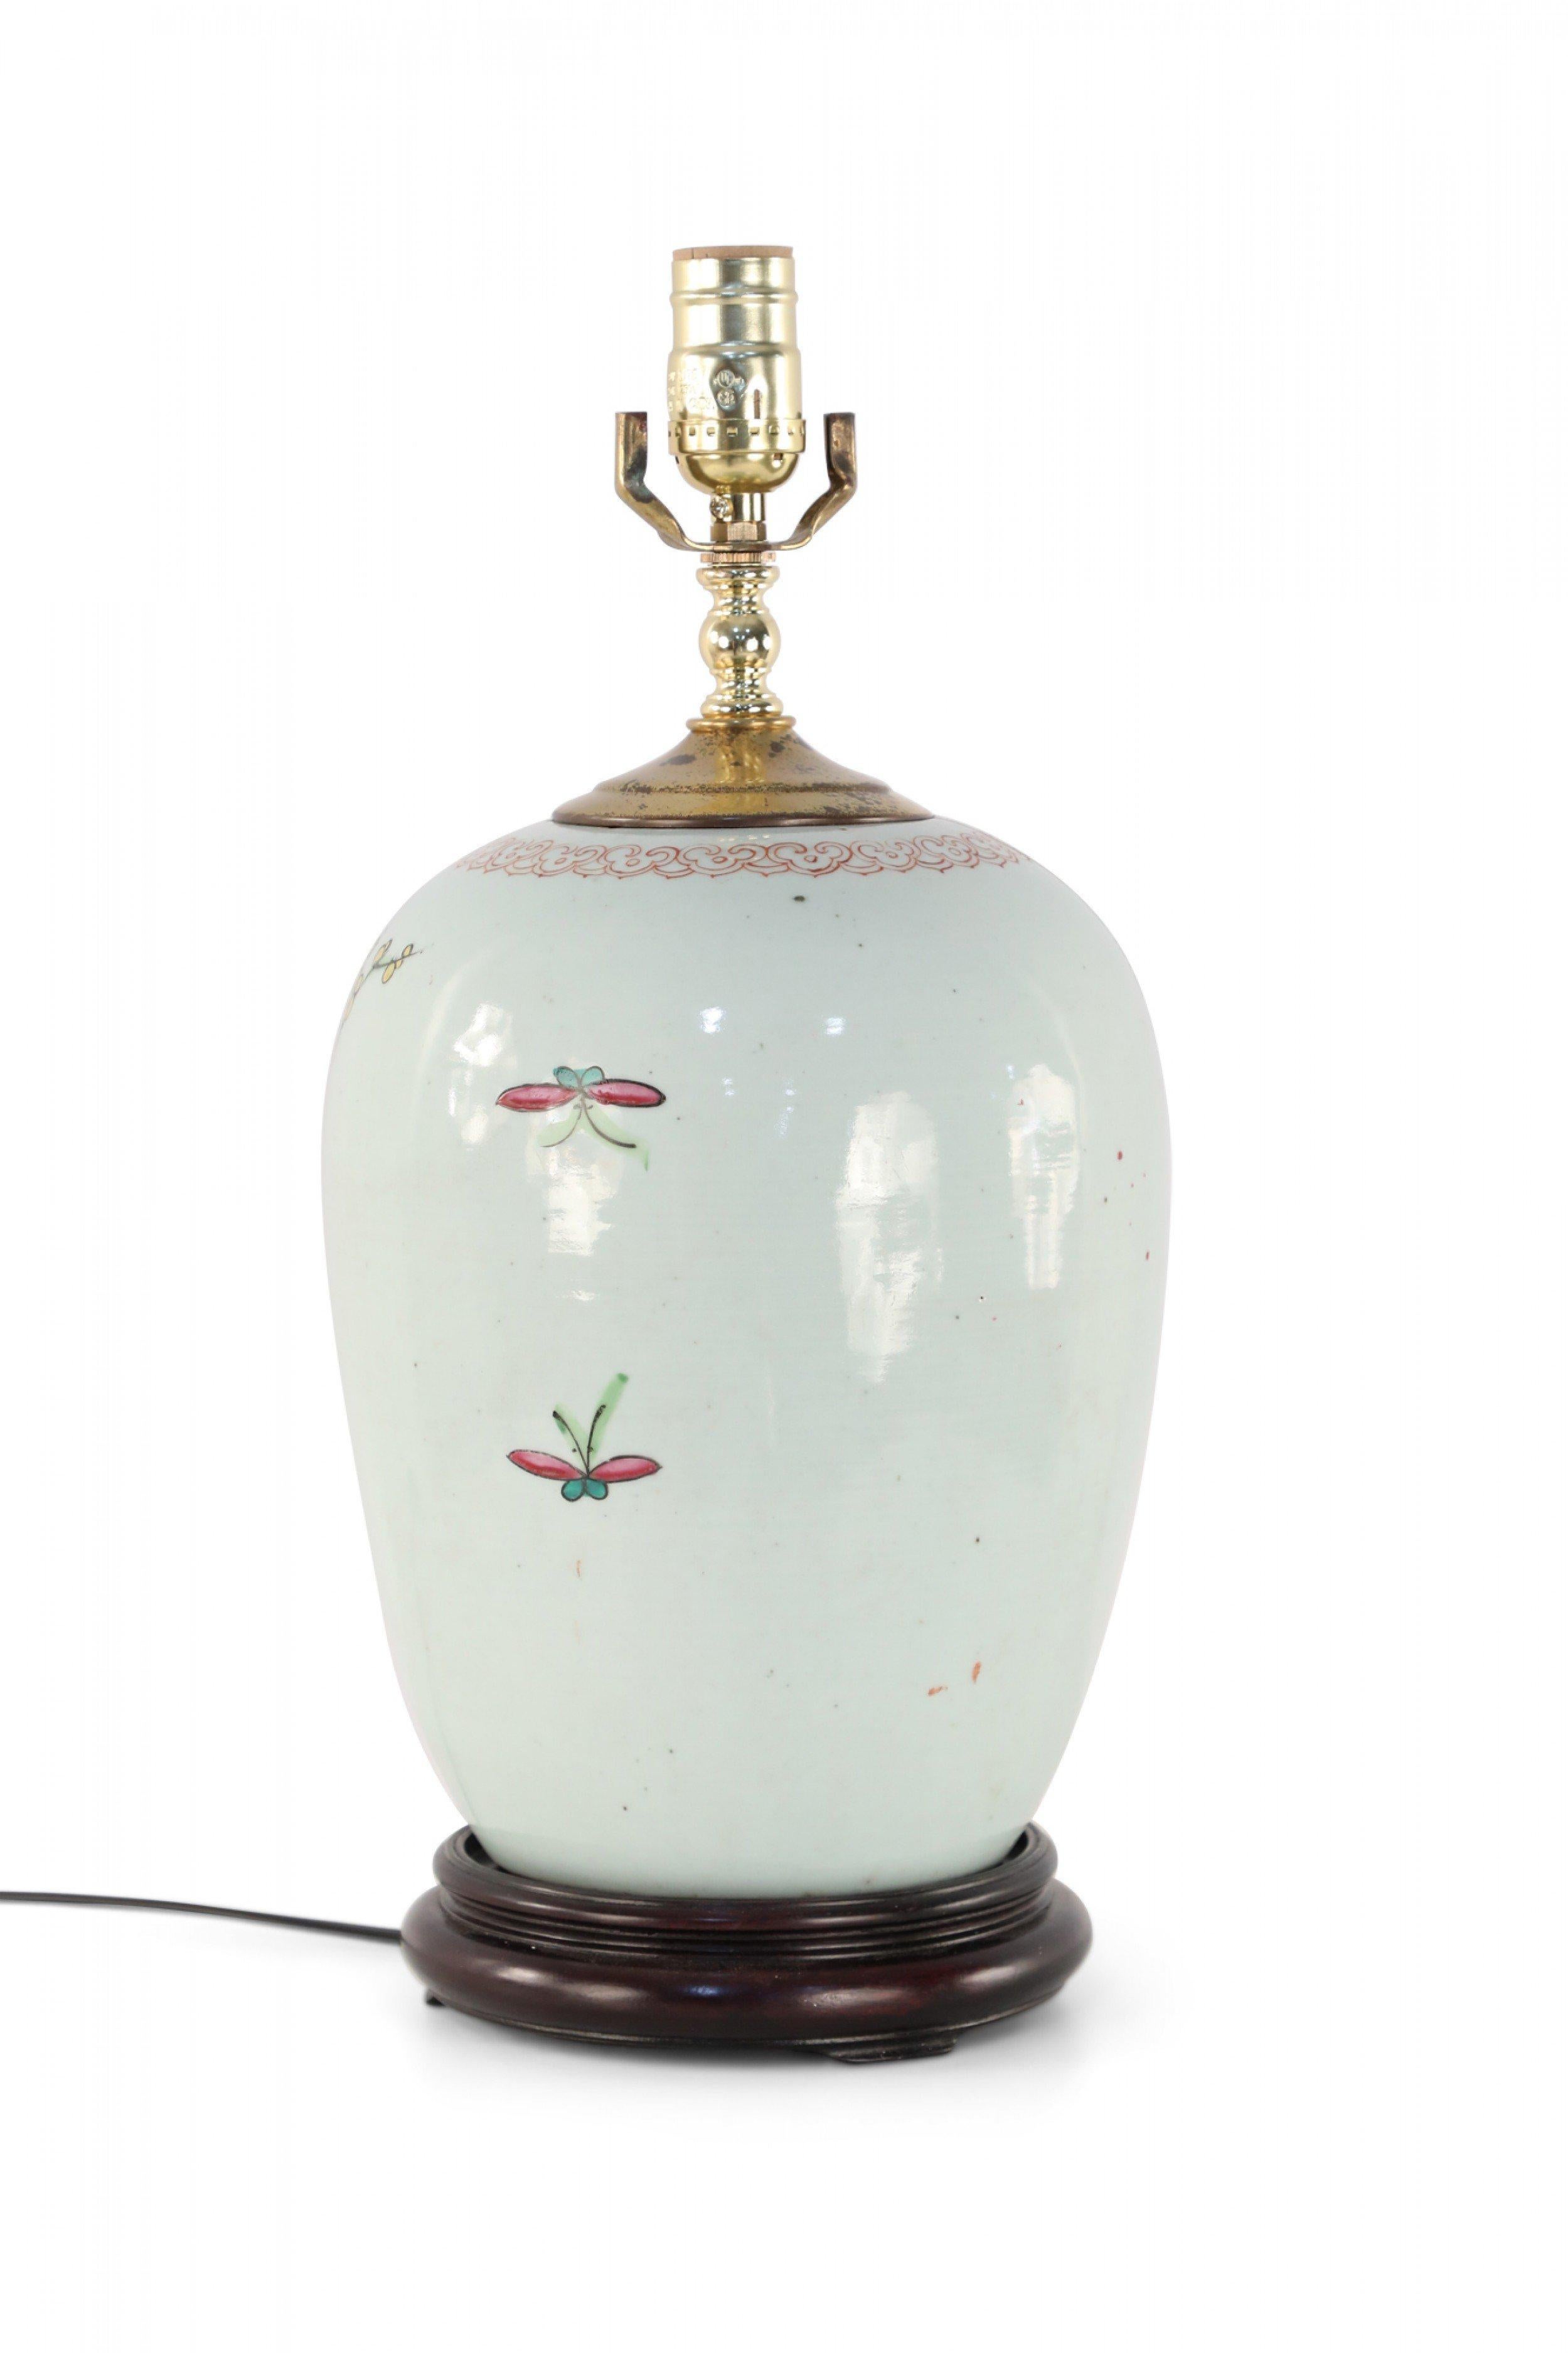 20th Century Chinese White Floral Patterned Porcelain Table Lamp For Sale